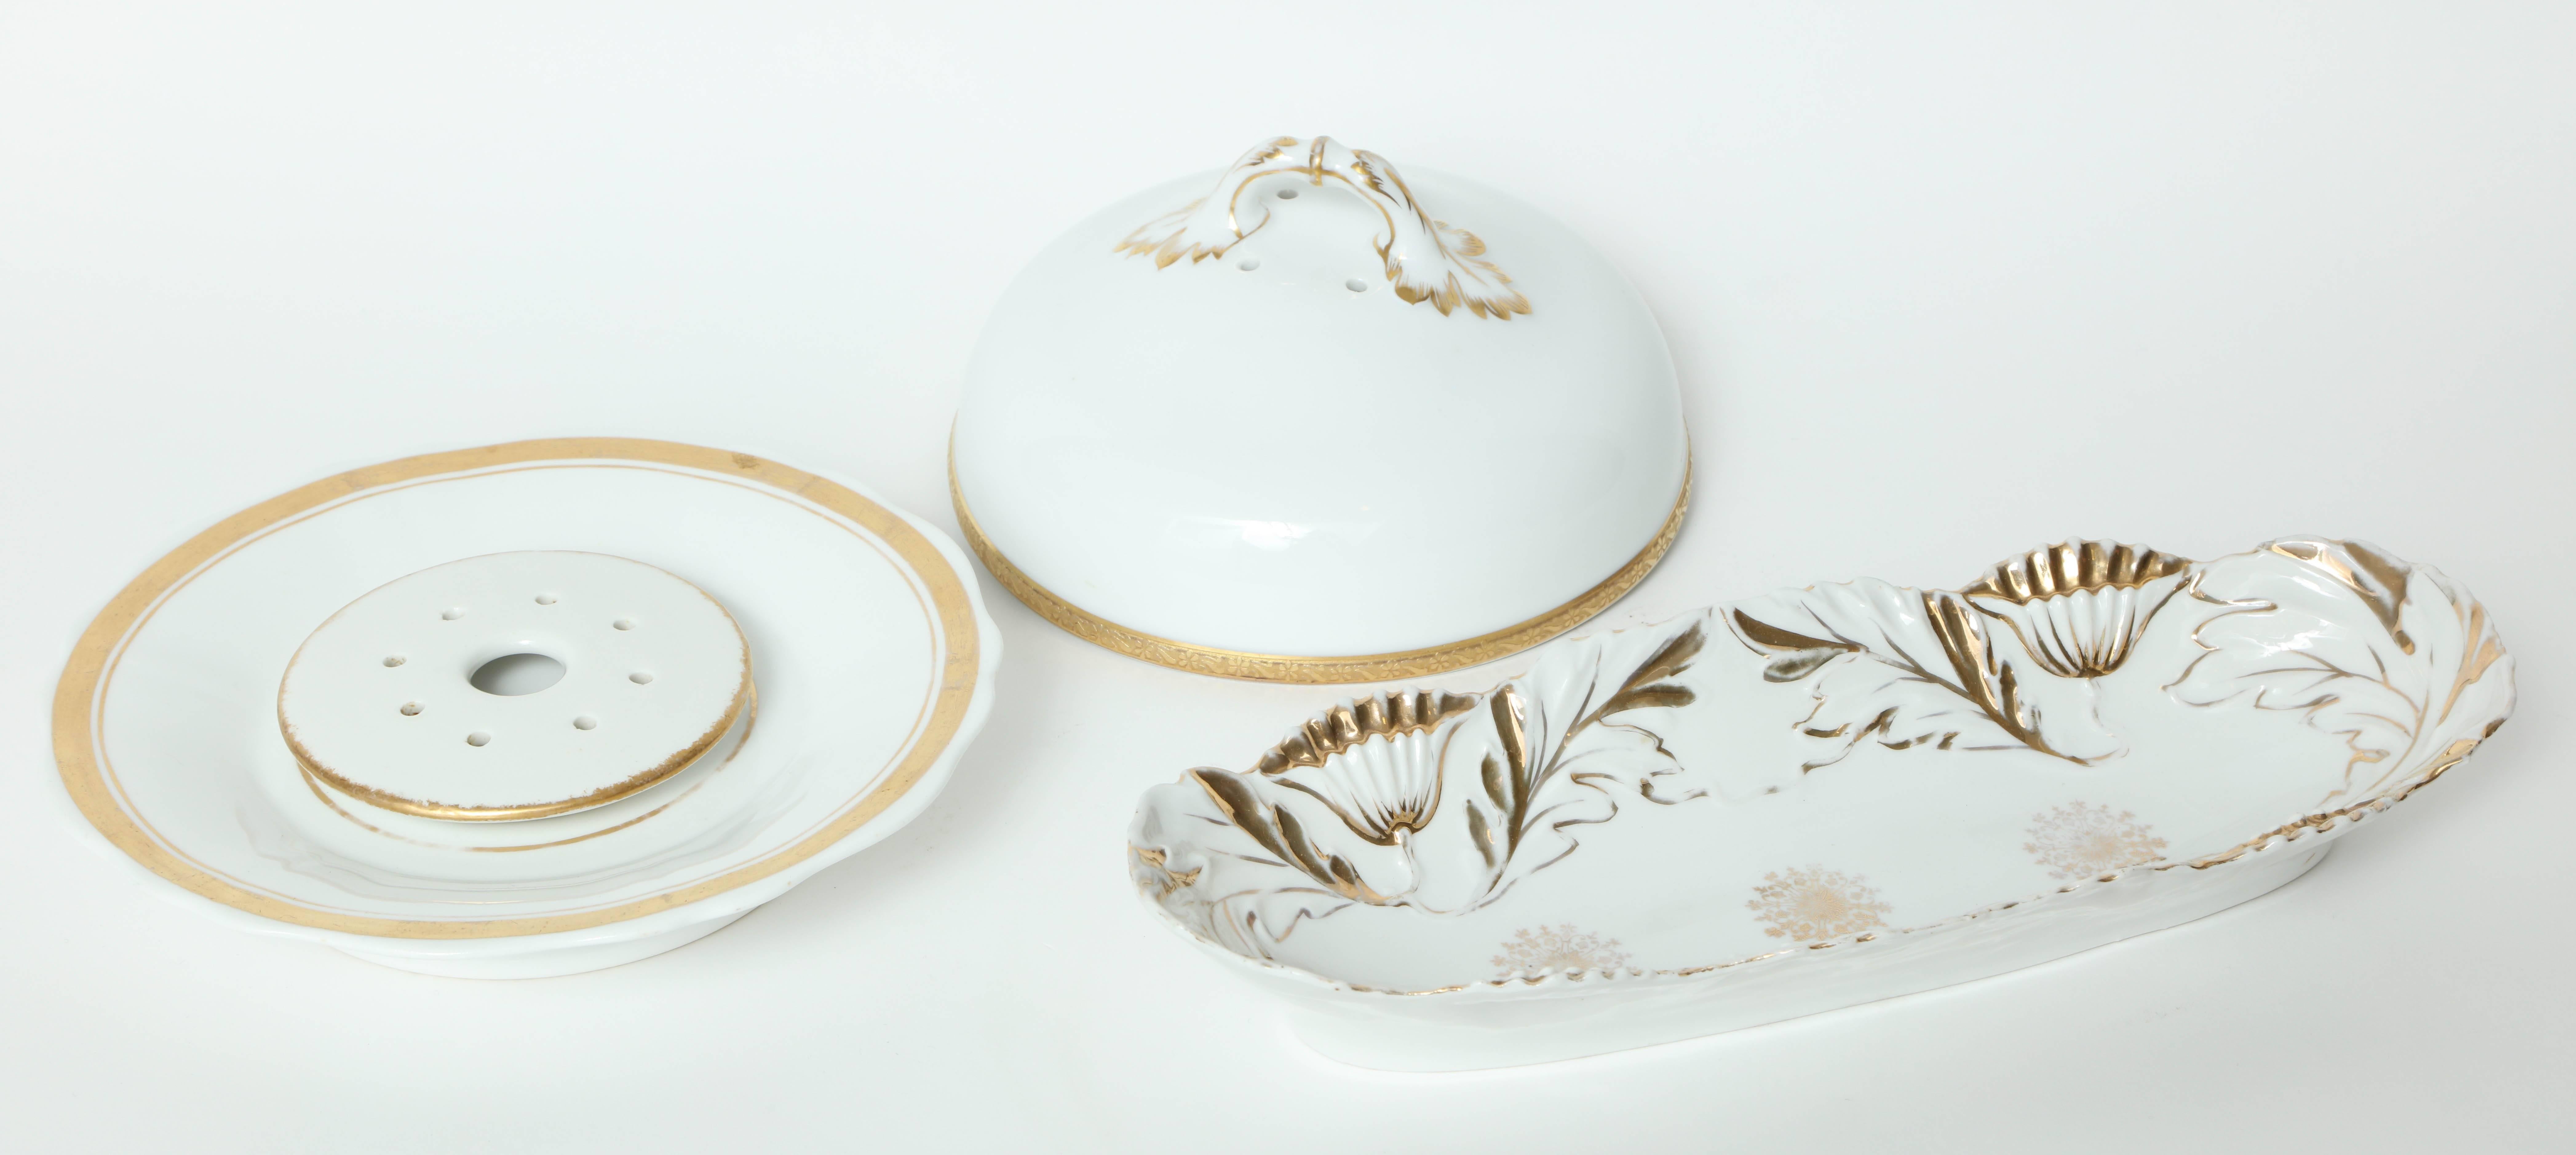 Set of two French 1940s porcelain serving pieces with gilt accents. Set includes a covered butter/cheese server with stylized leaf handle and an oblong serving vessel with stylized floral border in the interior.

Oblong vessel measures 11 7/8